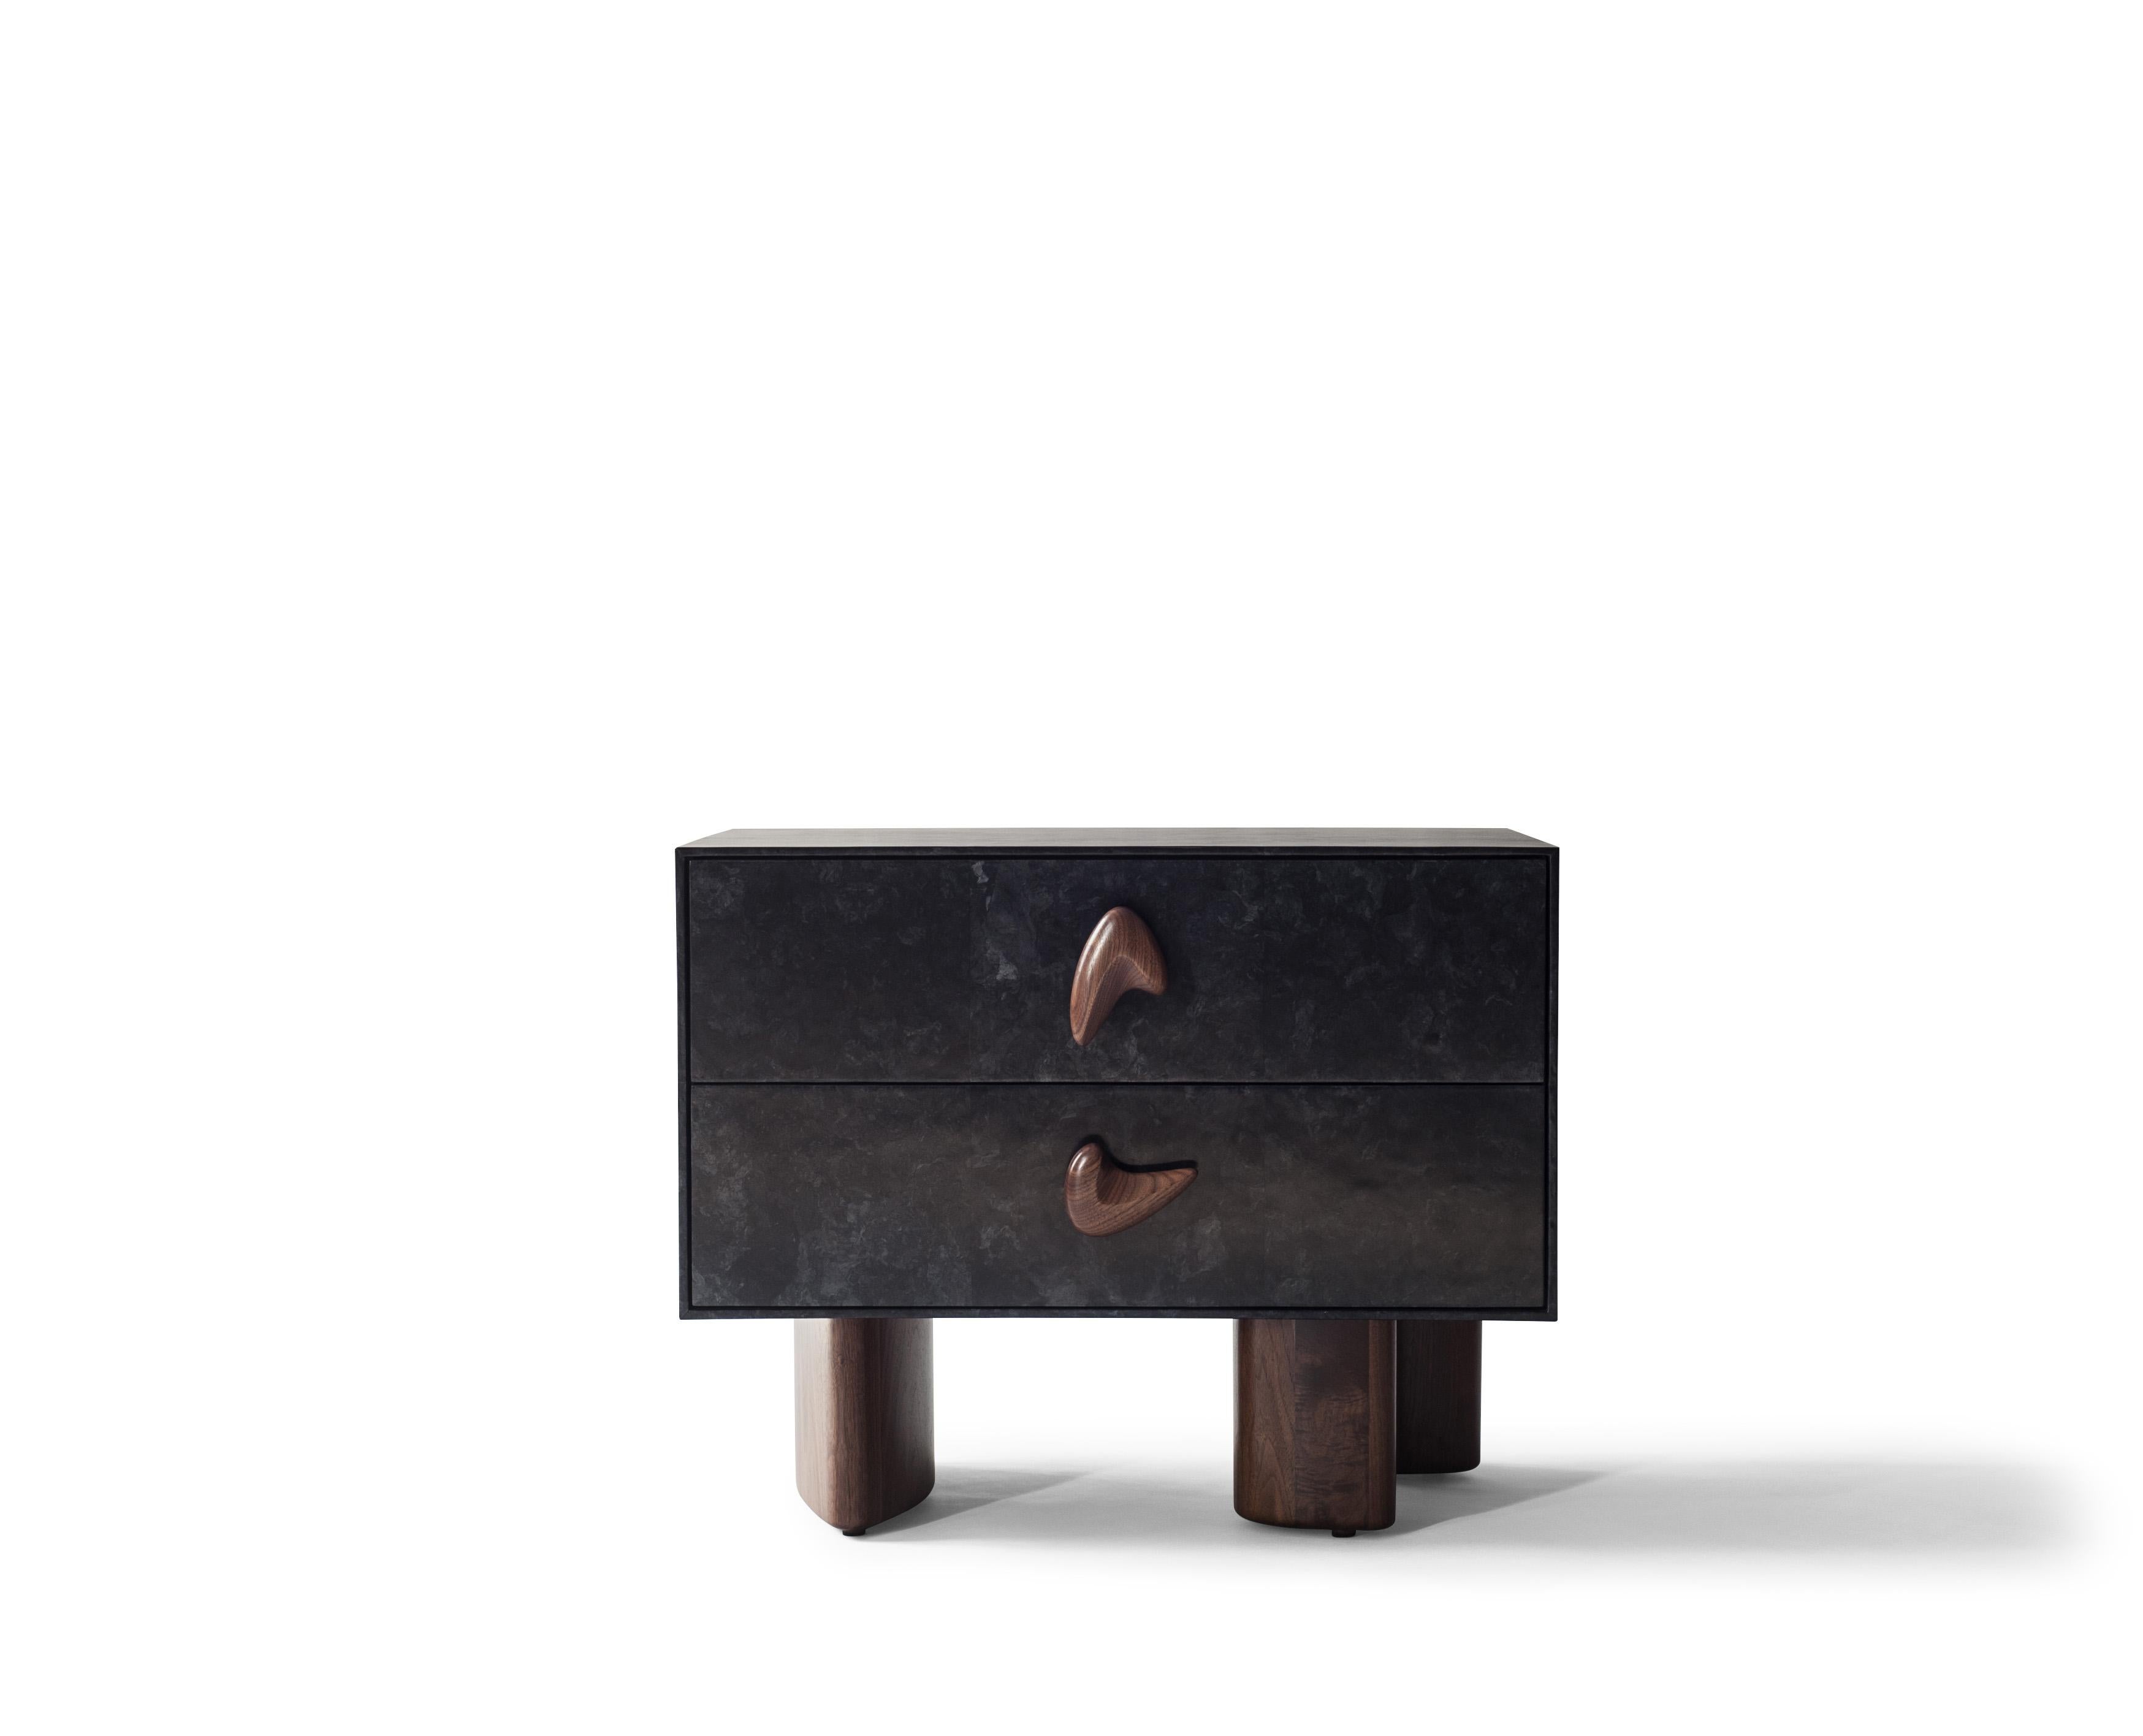 Corbu bedside table by DeMuro Das
Dimensions: W 76 x D 50.2 x H 61.5 cm
Materials: Solid walnut, matte
Carta (Coal), matte

Dimensions and finishes can be customized.

DeMuro Das is an international design firm and the aesthetic and cultural